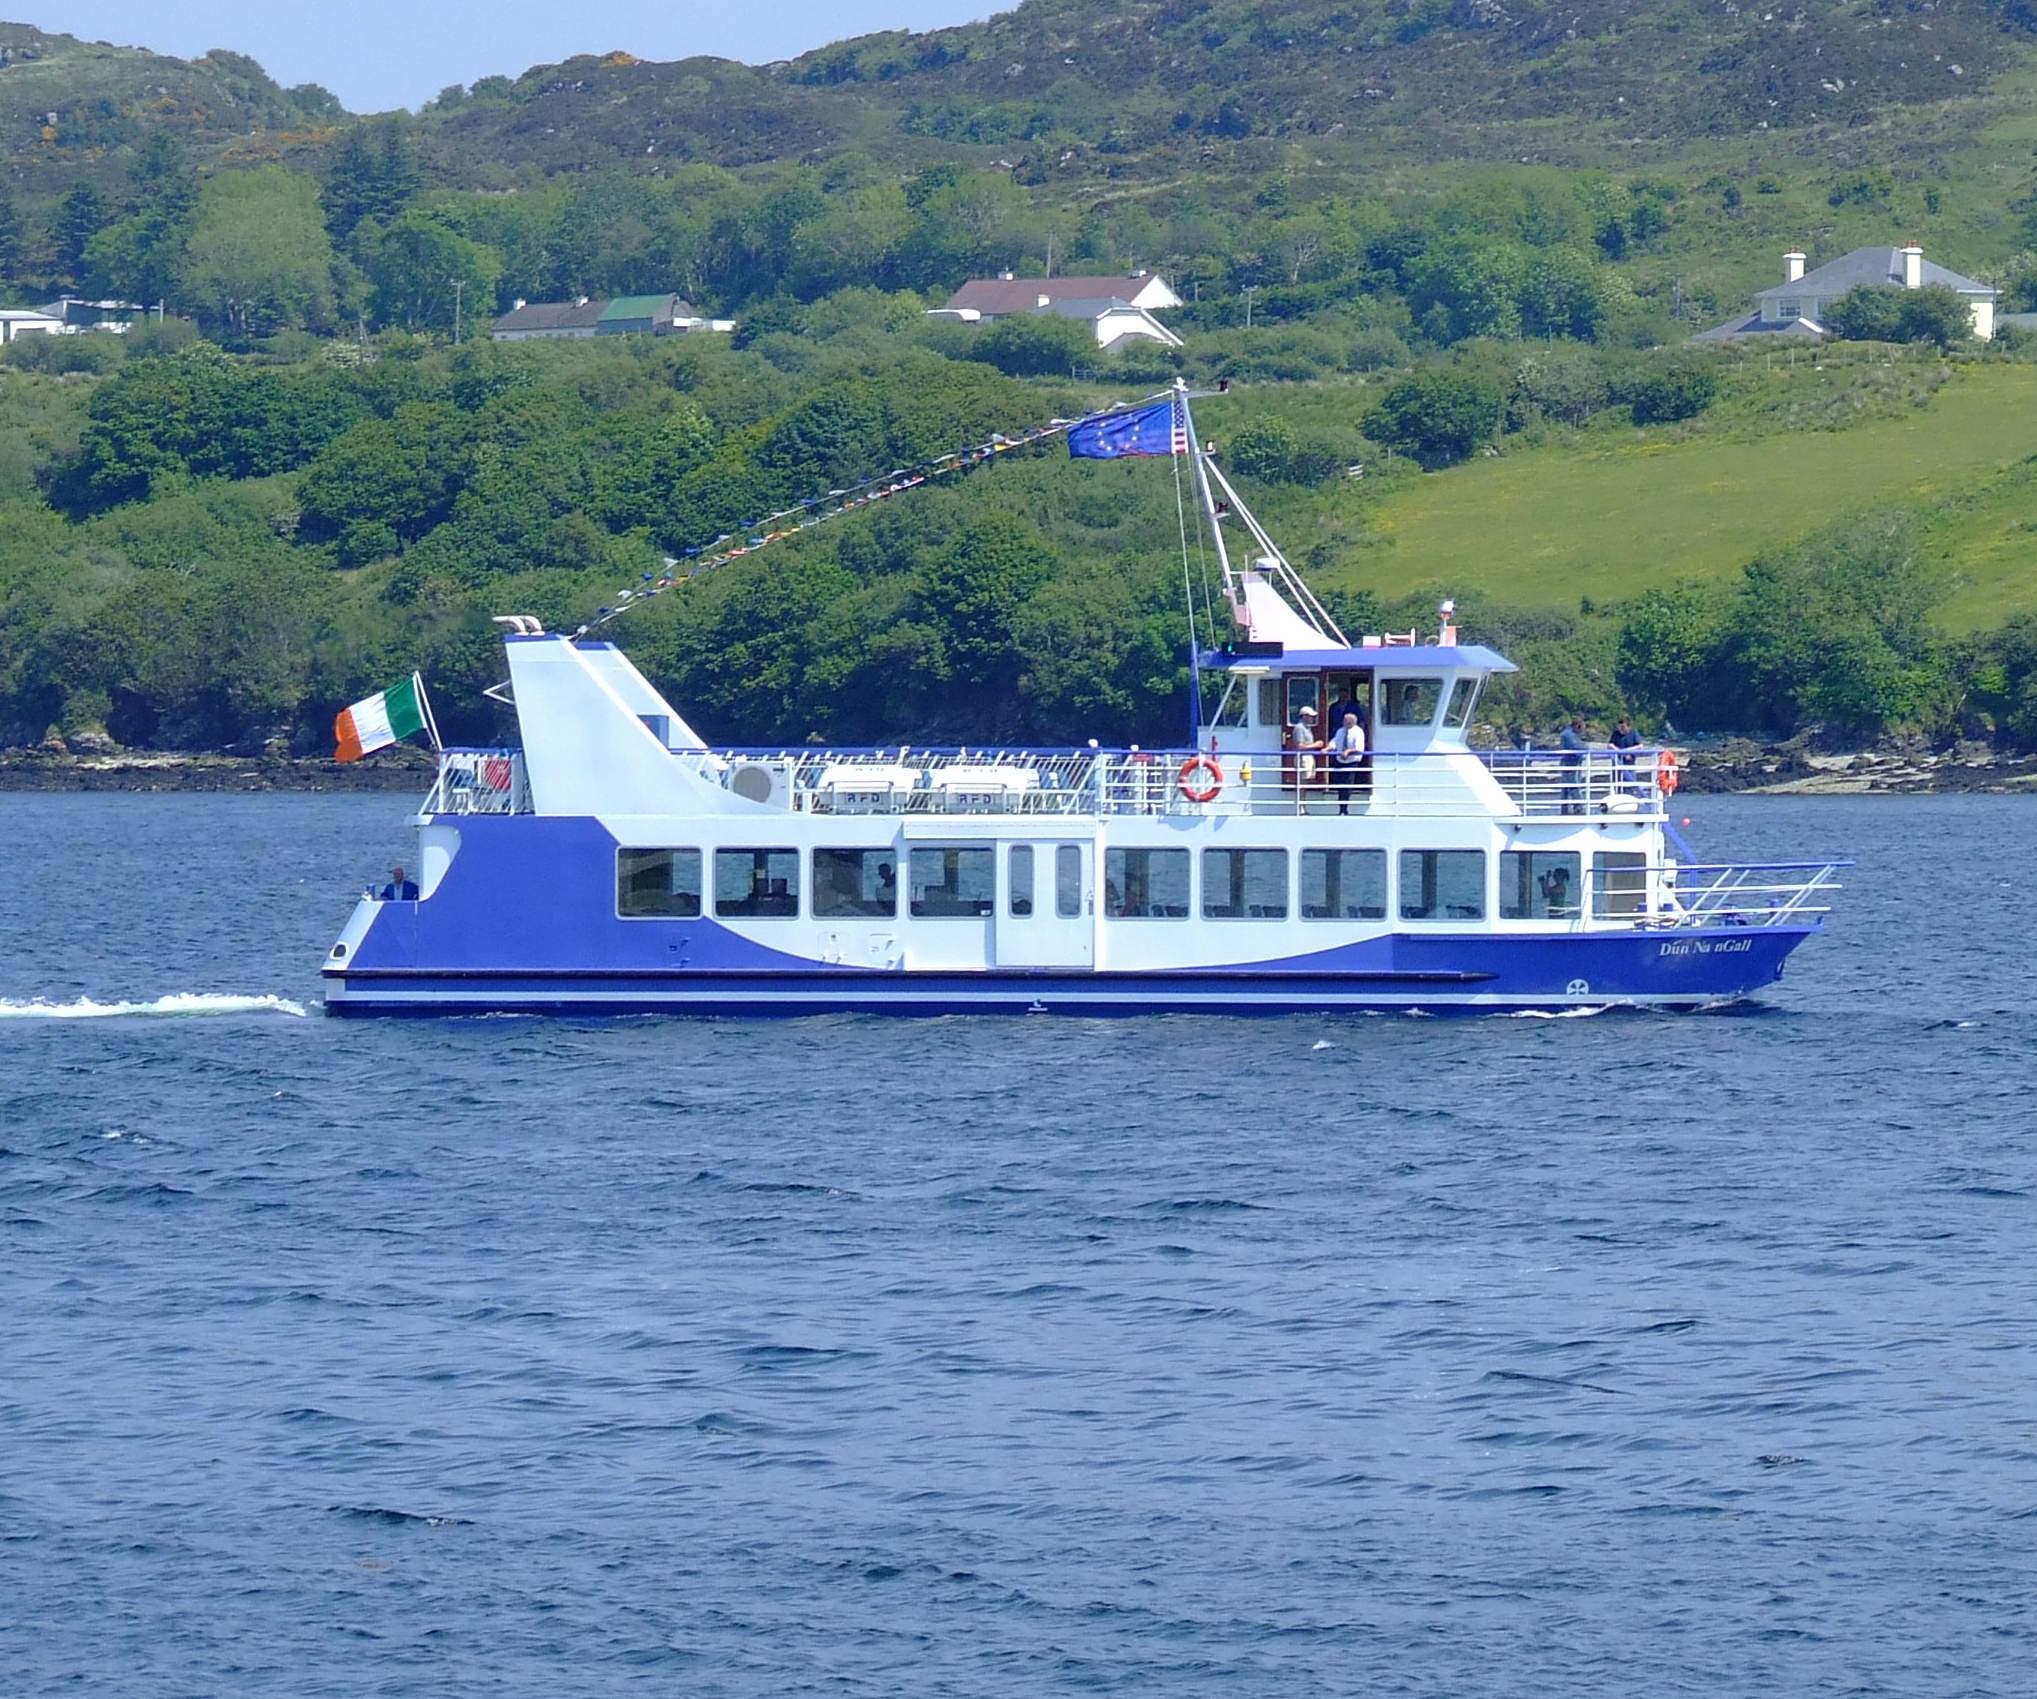 Donegal Bay Waterbus - YourDaysOut